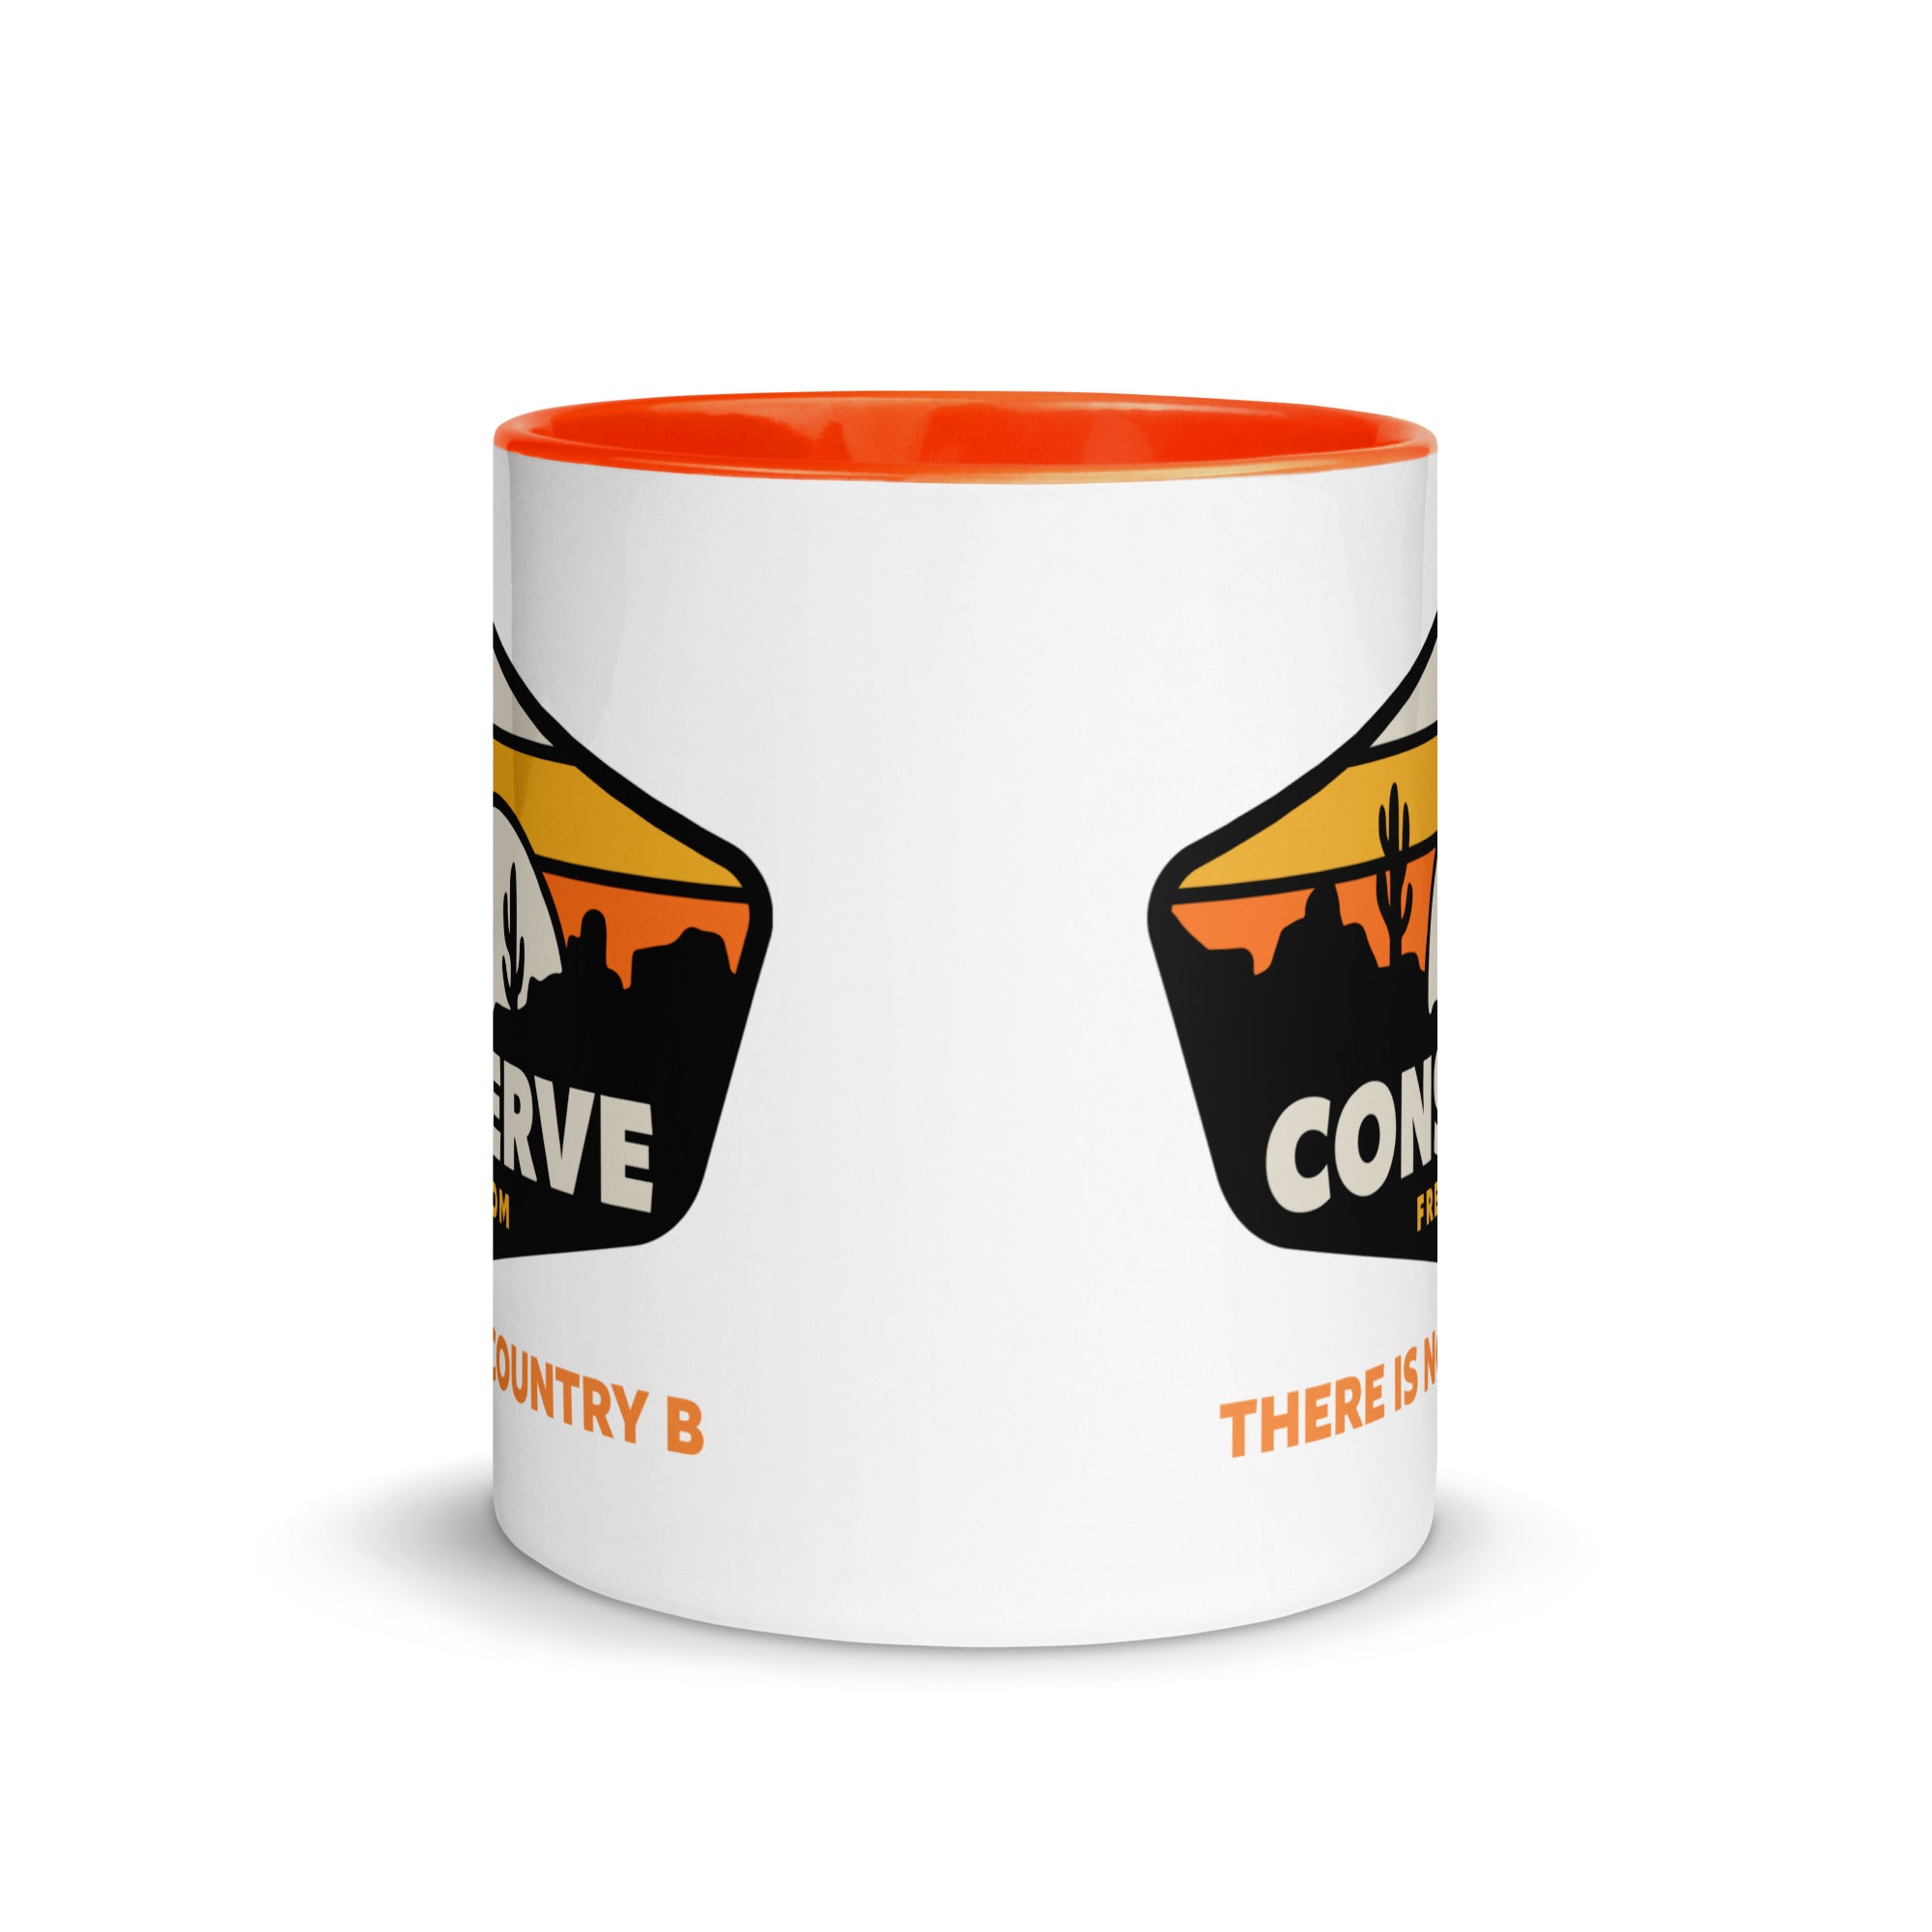 Conserve Freedom There is No Country B Mug